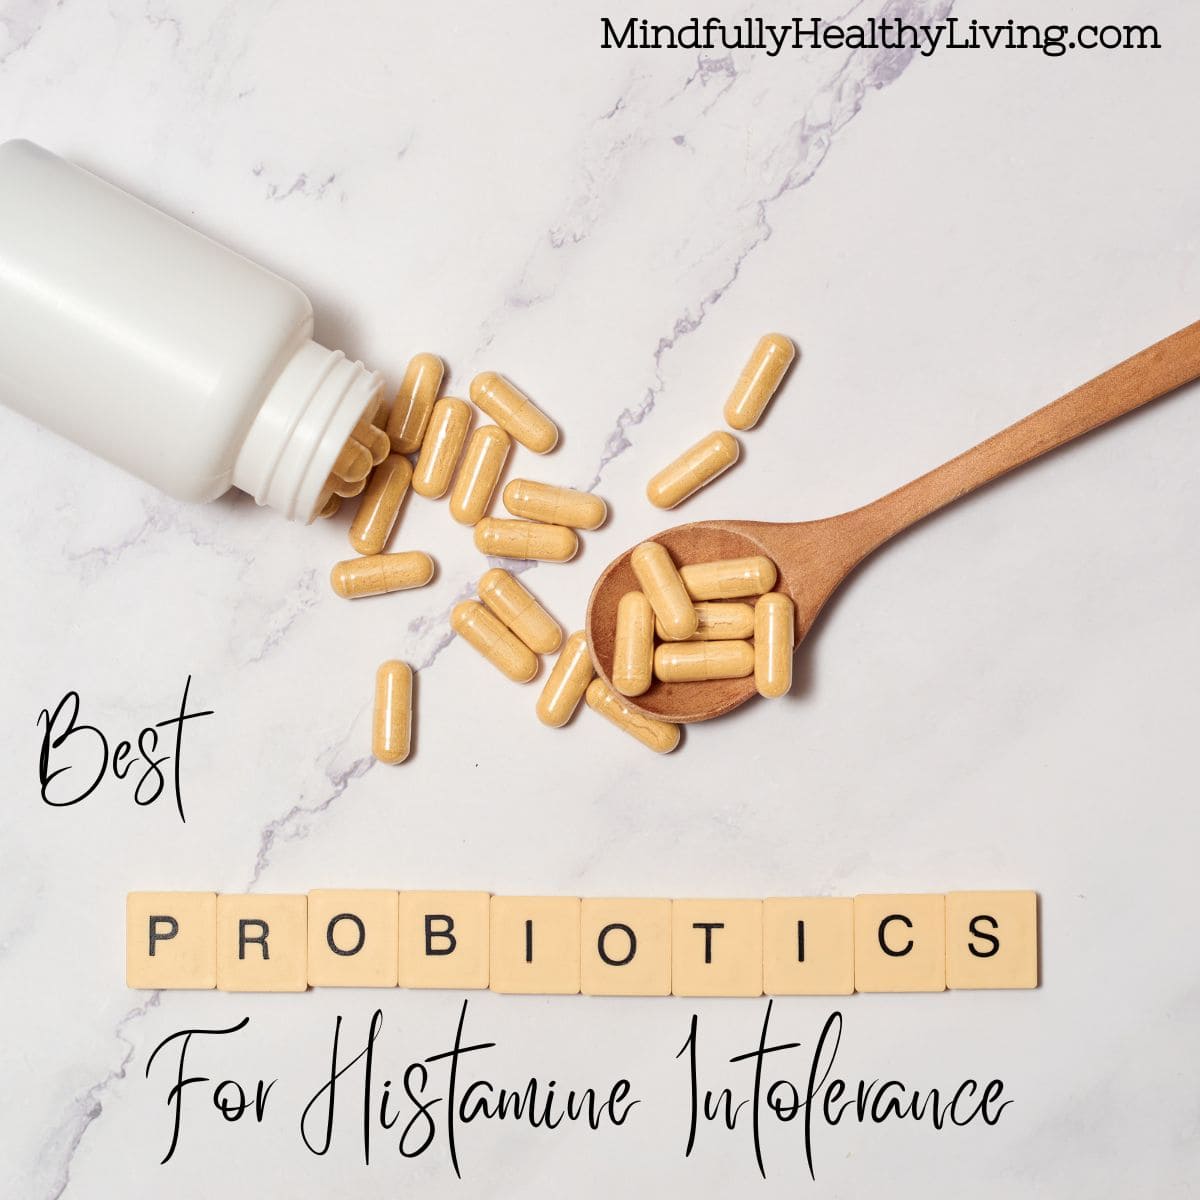 Image of a bottle of capsules spilled onto a marble surface with a wooden spoon; the text reads "Best Probiotics For Histamine Intolerance - MindfullyHealthyLiving.com